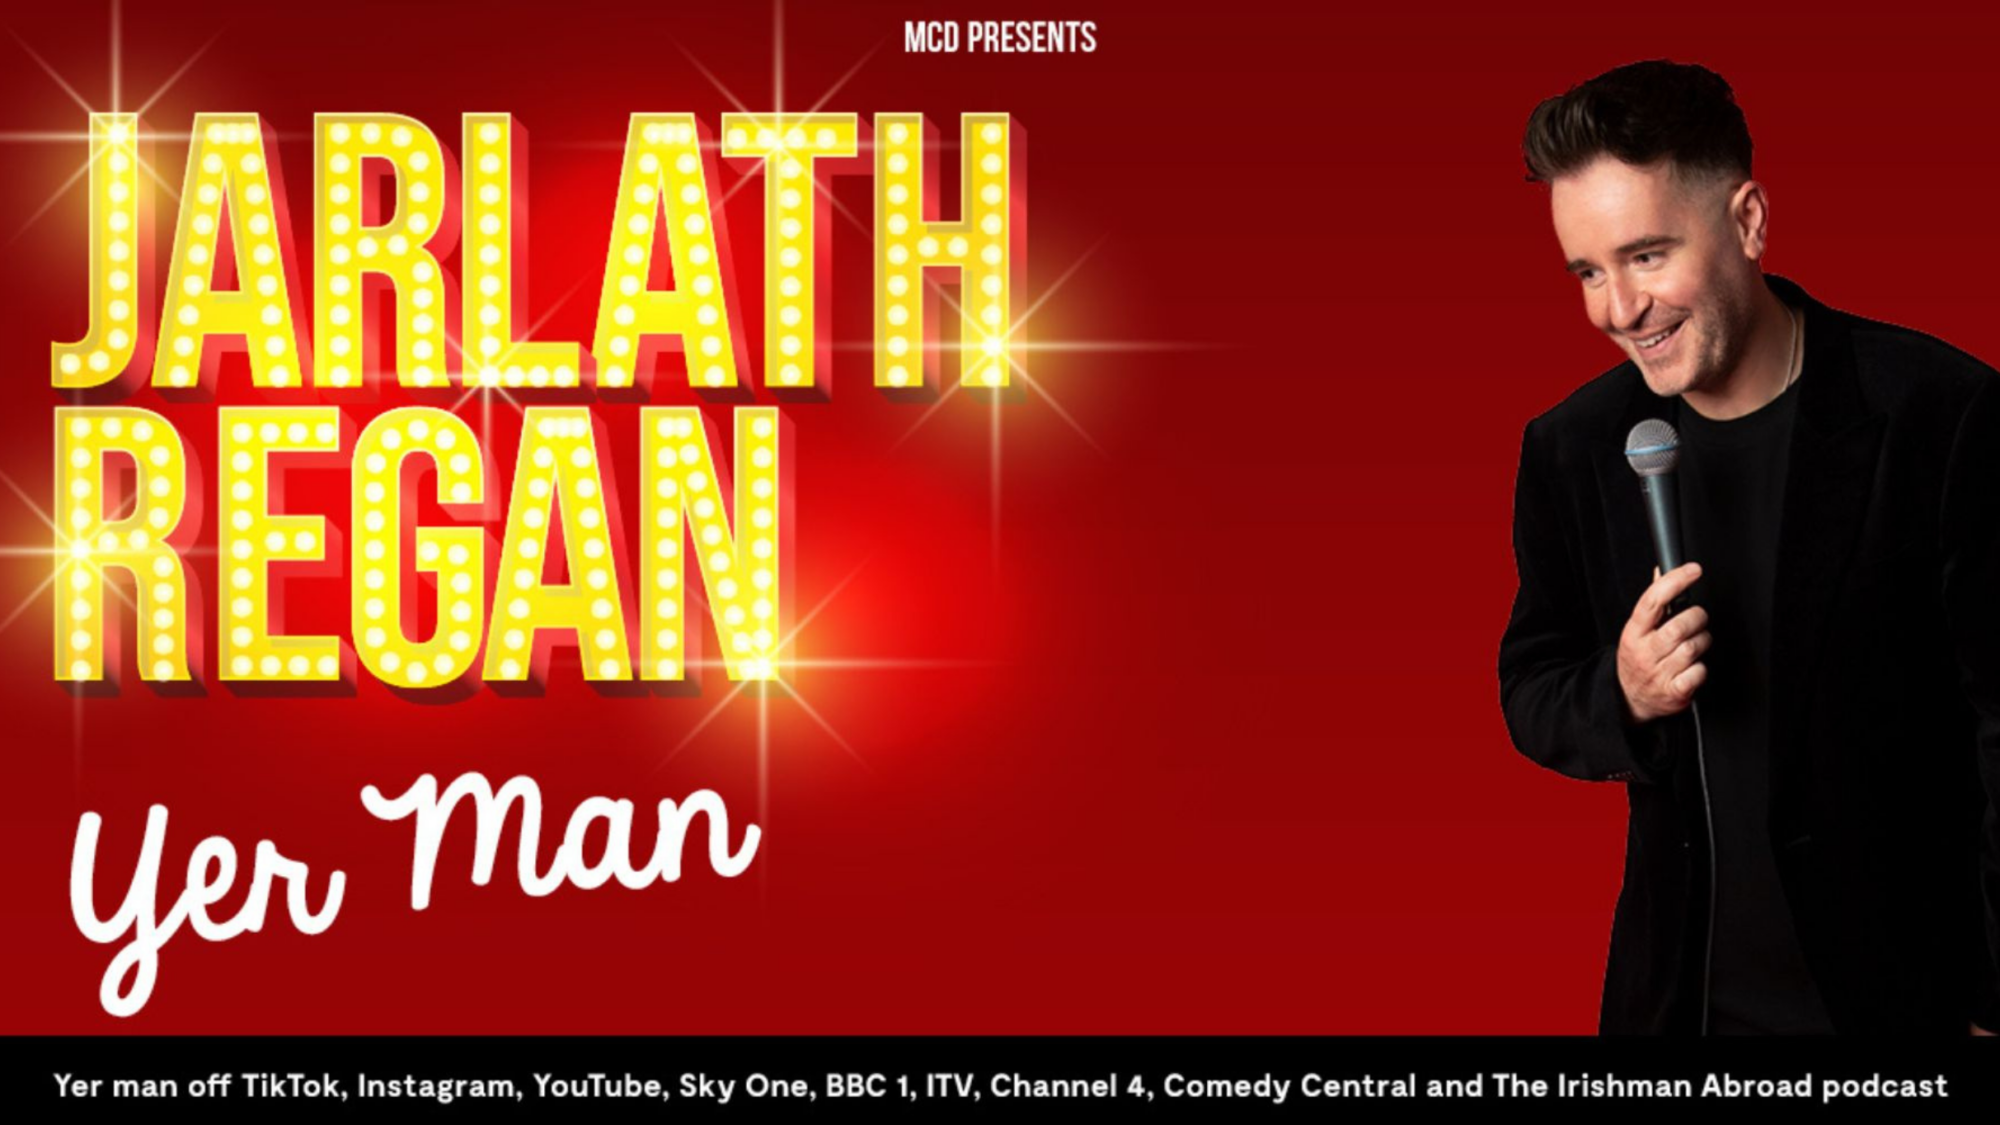 Image name Jarlath Regan Yer Man at Sheffield City Hall Memorial Hall Sheffield the 22 image from the post Jarlath Regan: Yer Man at Sheffield City Hall Memorial Hall, Sheffield in Yorkshire.com.